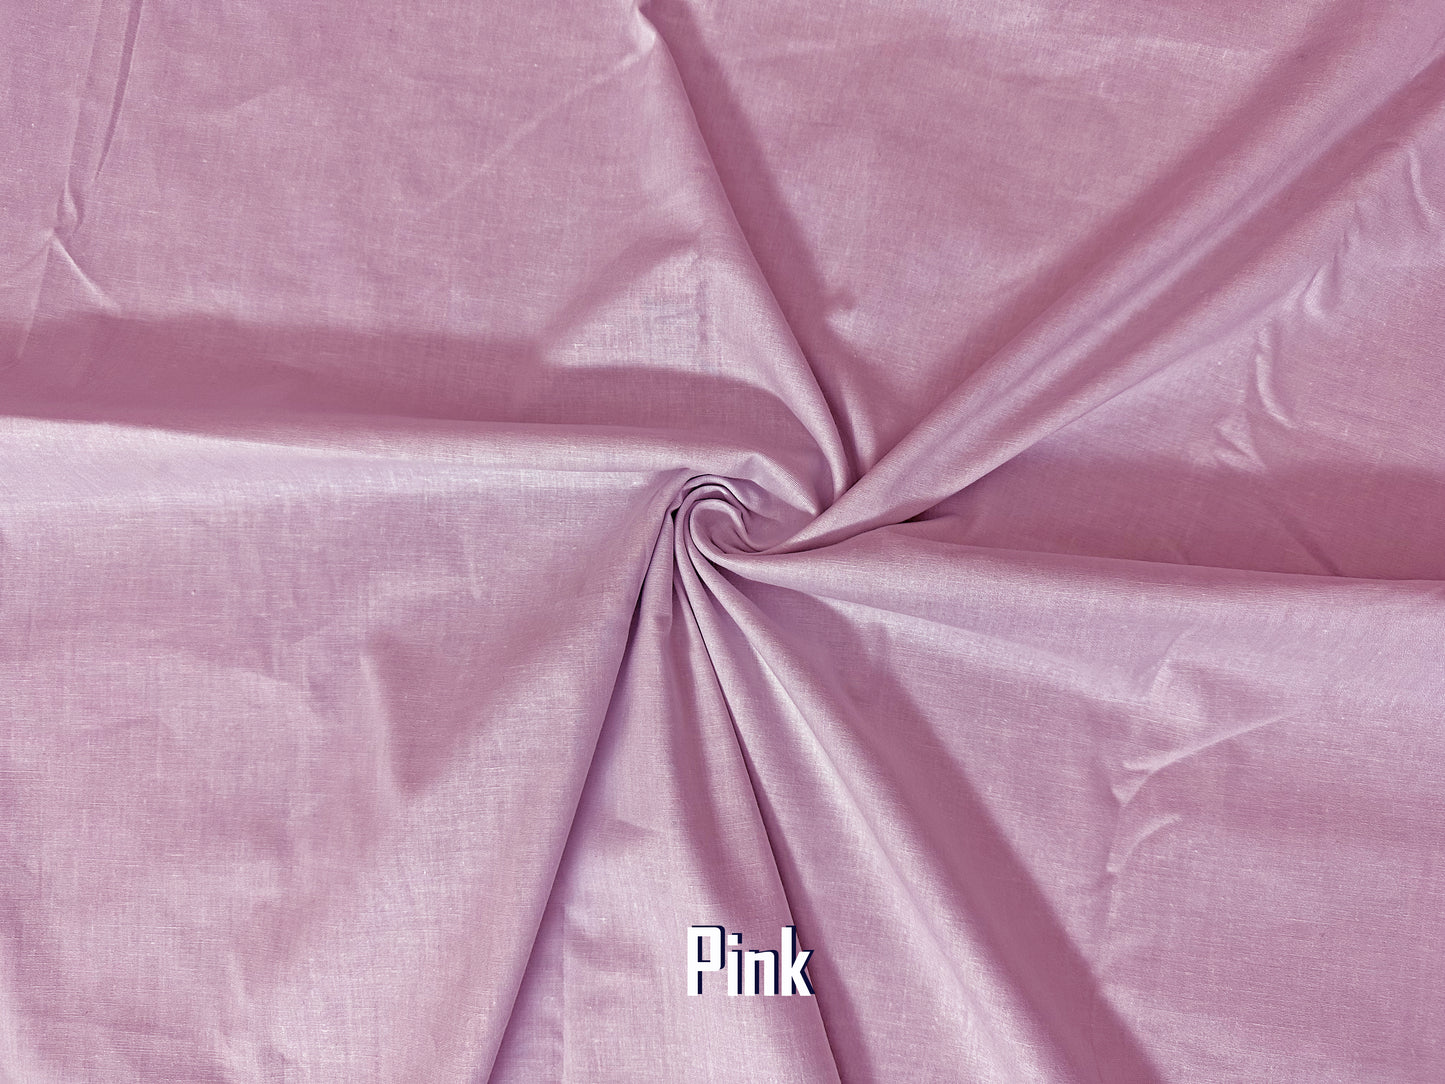 Woven Cotton Poplin Fabric-Pink Solid Color-WnCP008-Sold by the Bulk